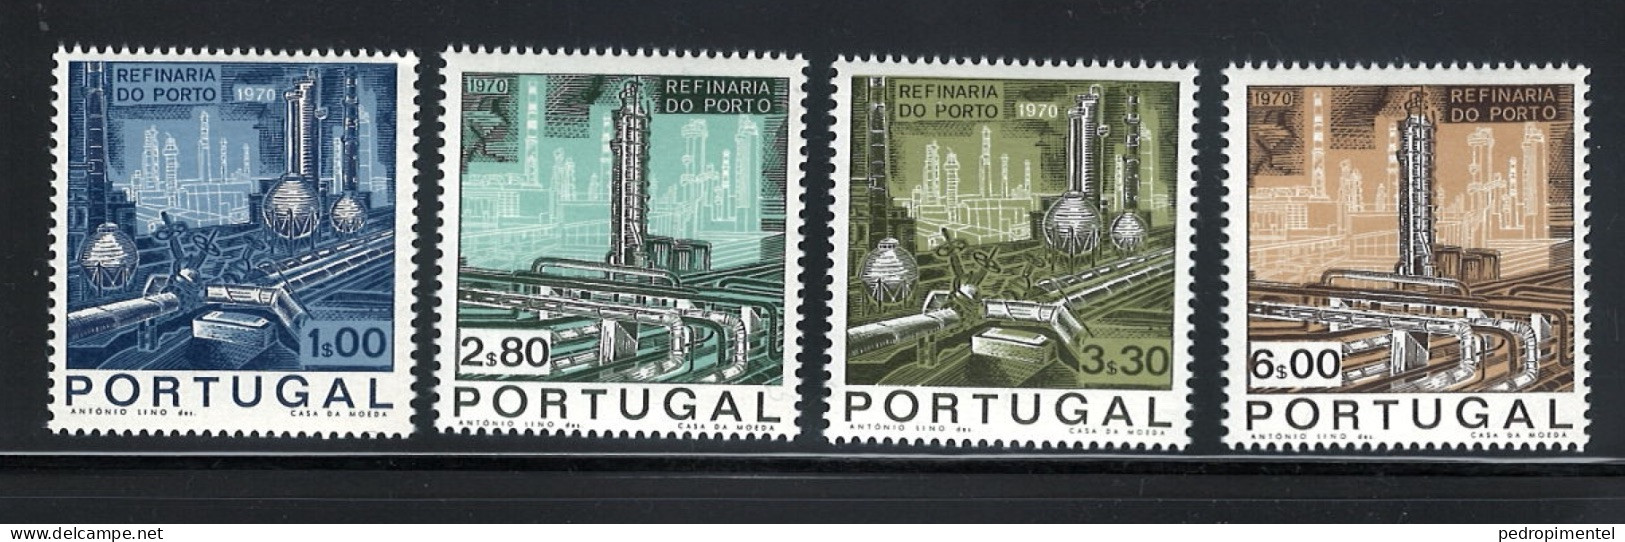 Portugal Stamps 1970 "Oporto Refinery" Condition MNH OG #1066-1069 - Unused Stamps